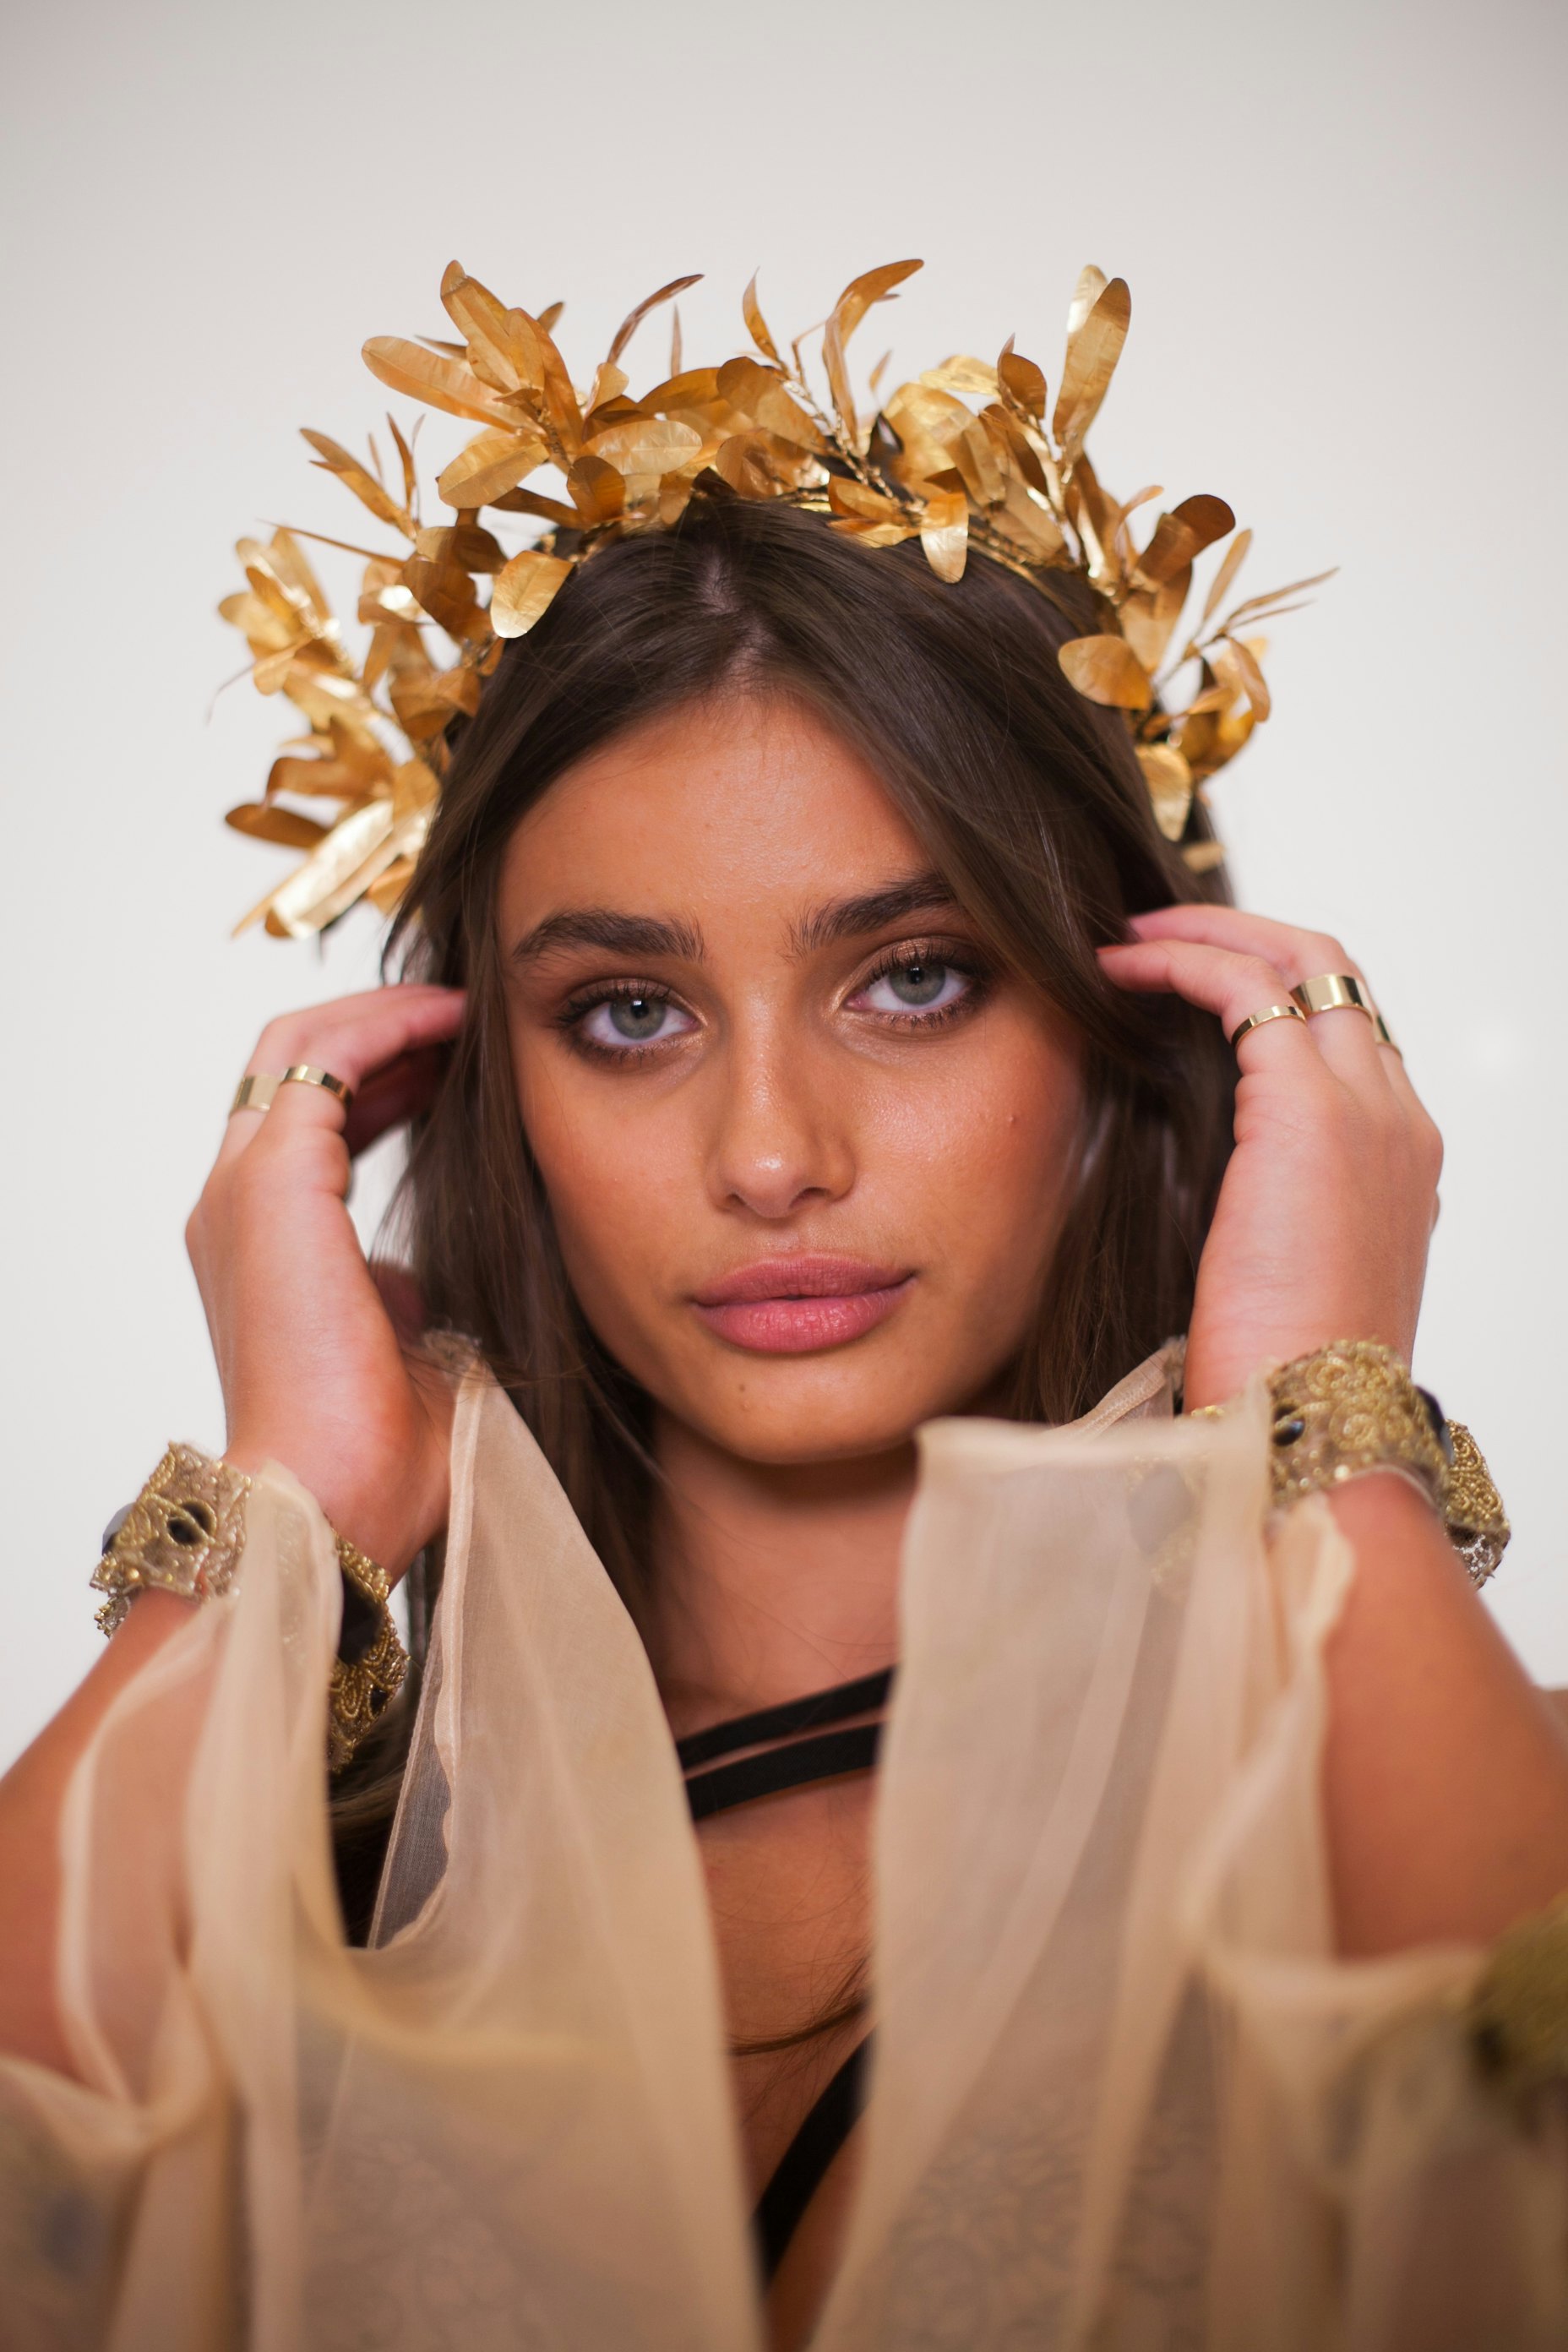 Taylor Hill 'blacked out' during her first Victoria's Secret fitting